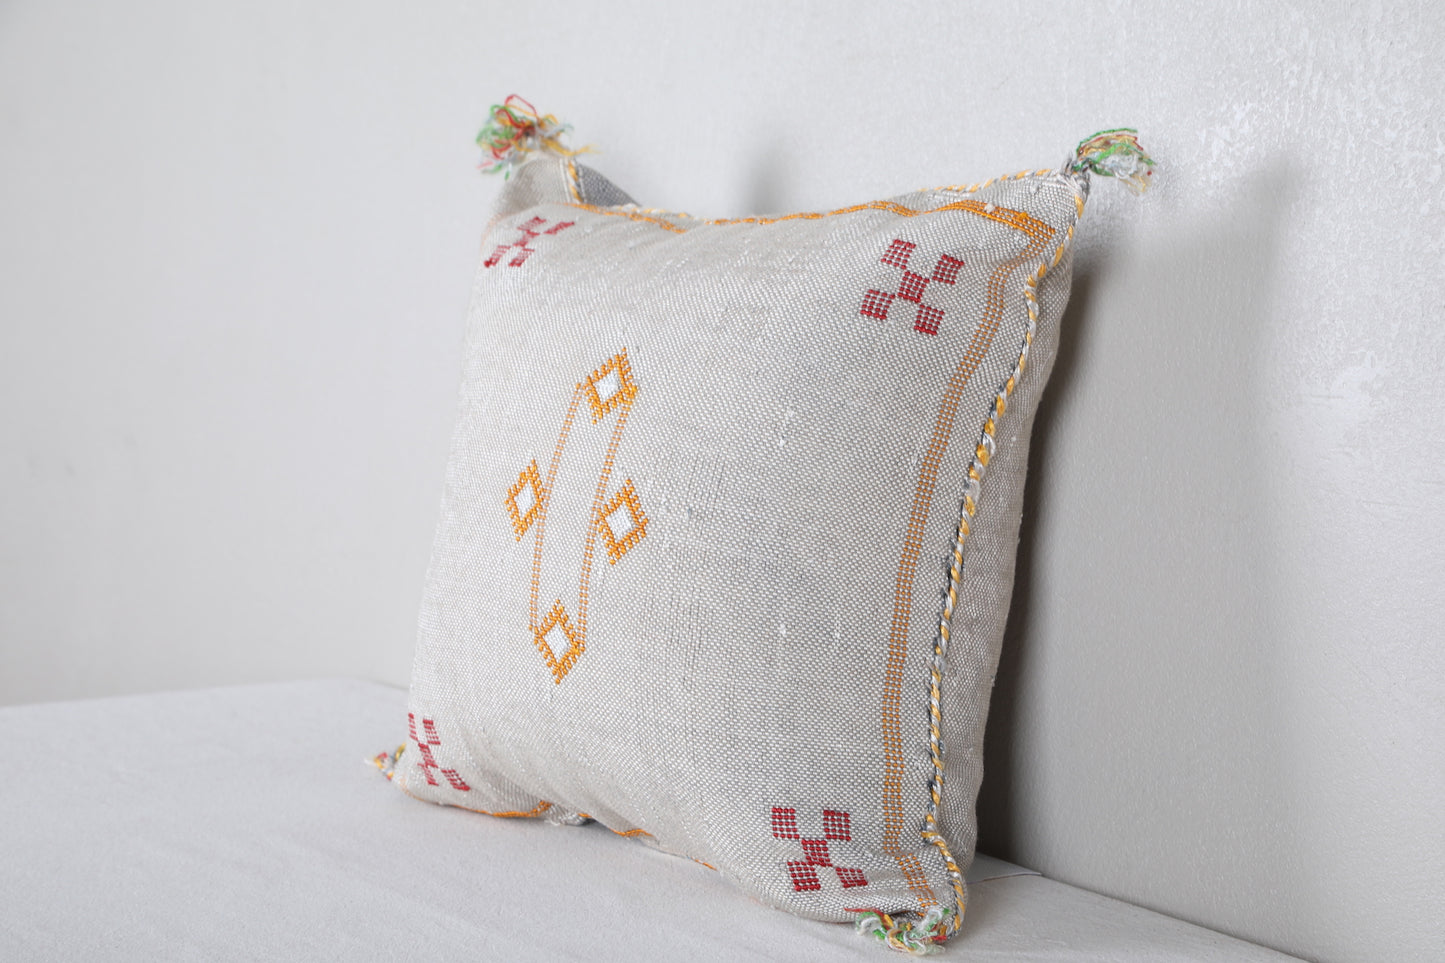 Moroccan kilim Pillow 16.9 INCHES X 17.7 INCHES